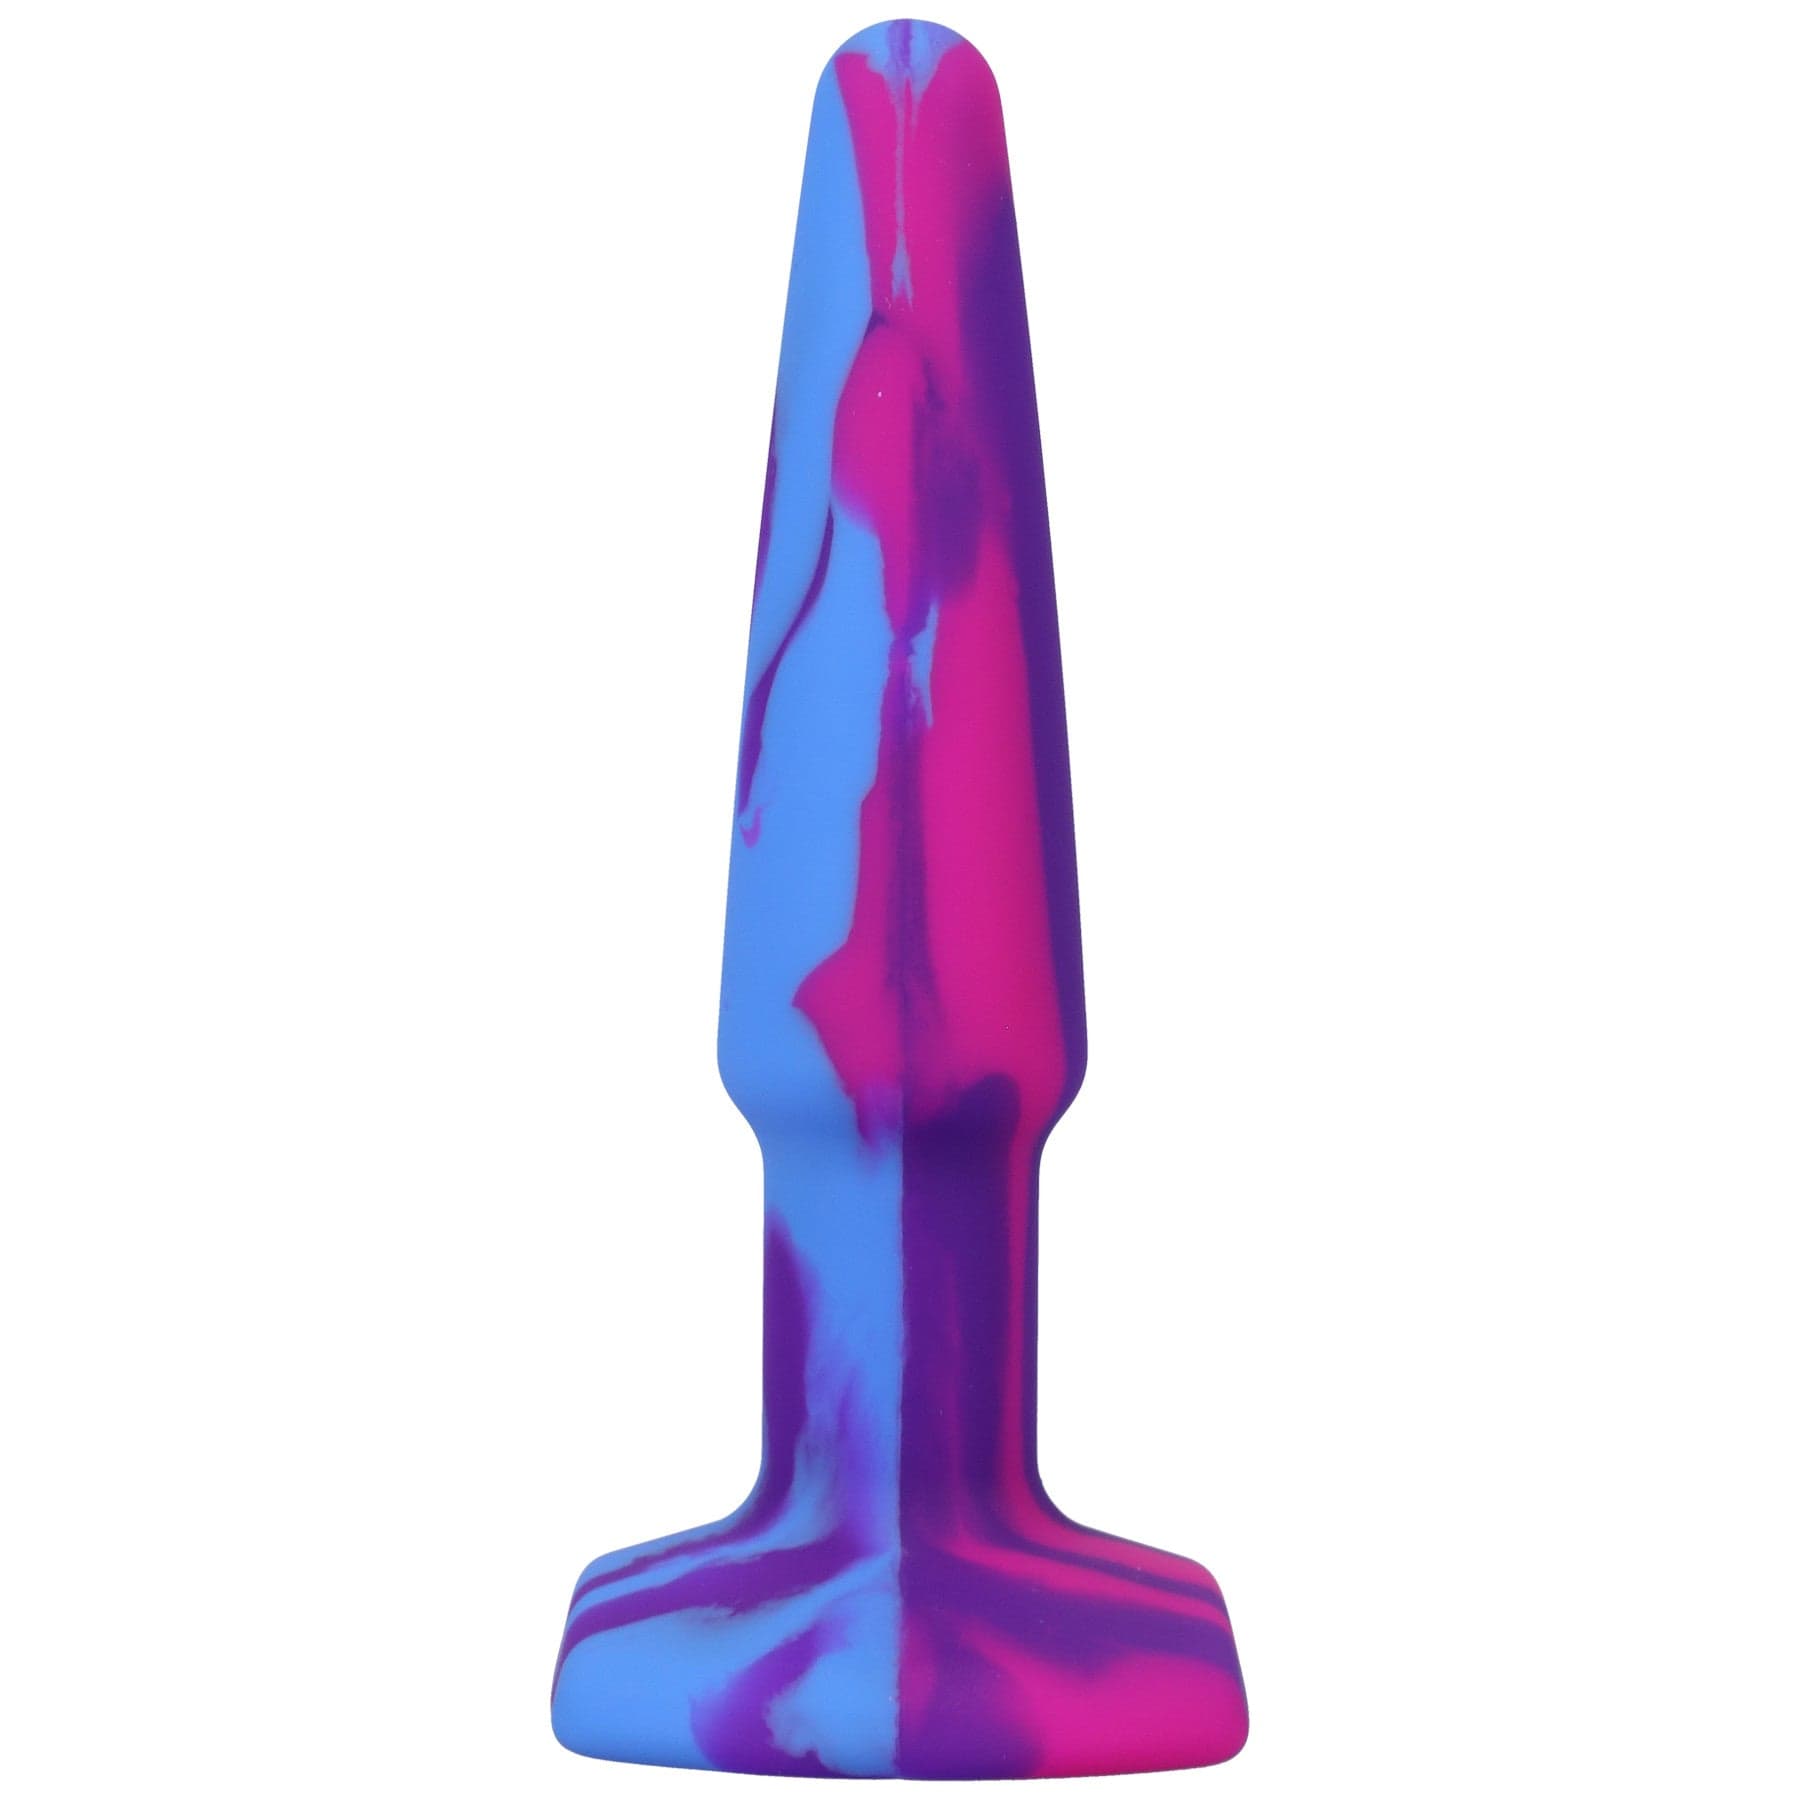 GROOVY 4" SILICONE ANAL PLUG - PINK